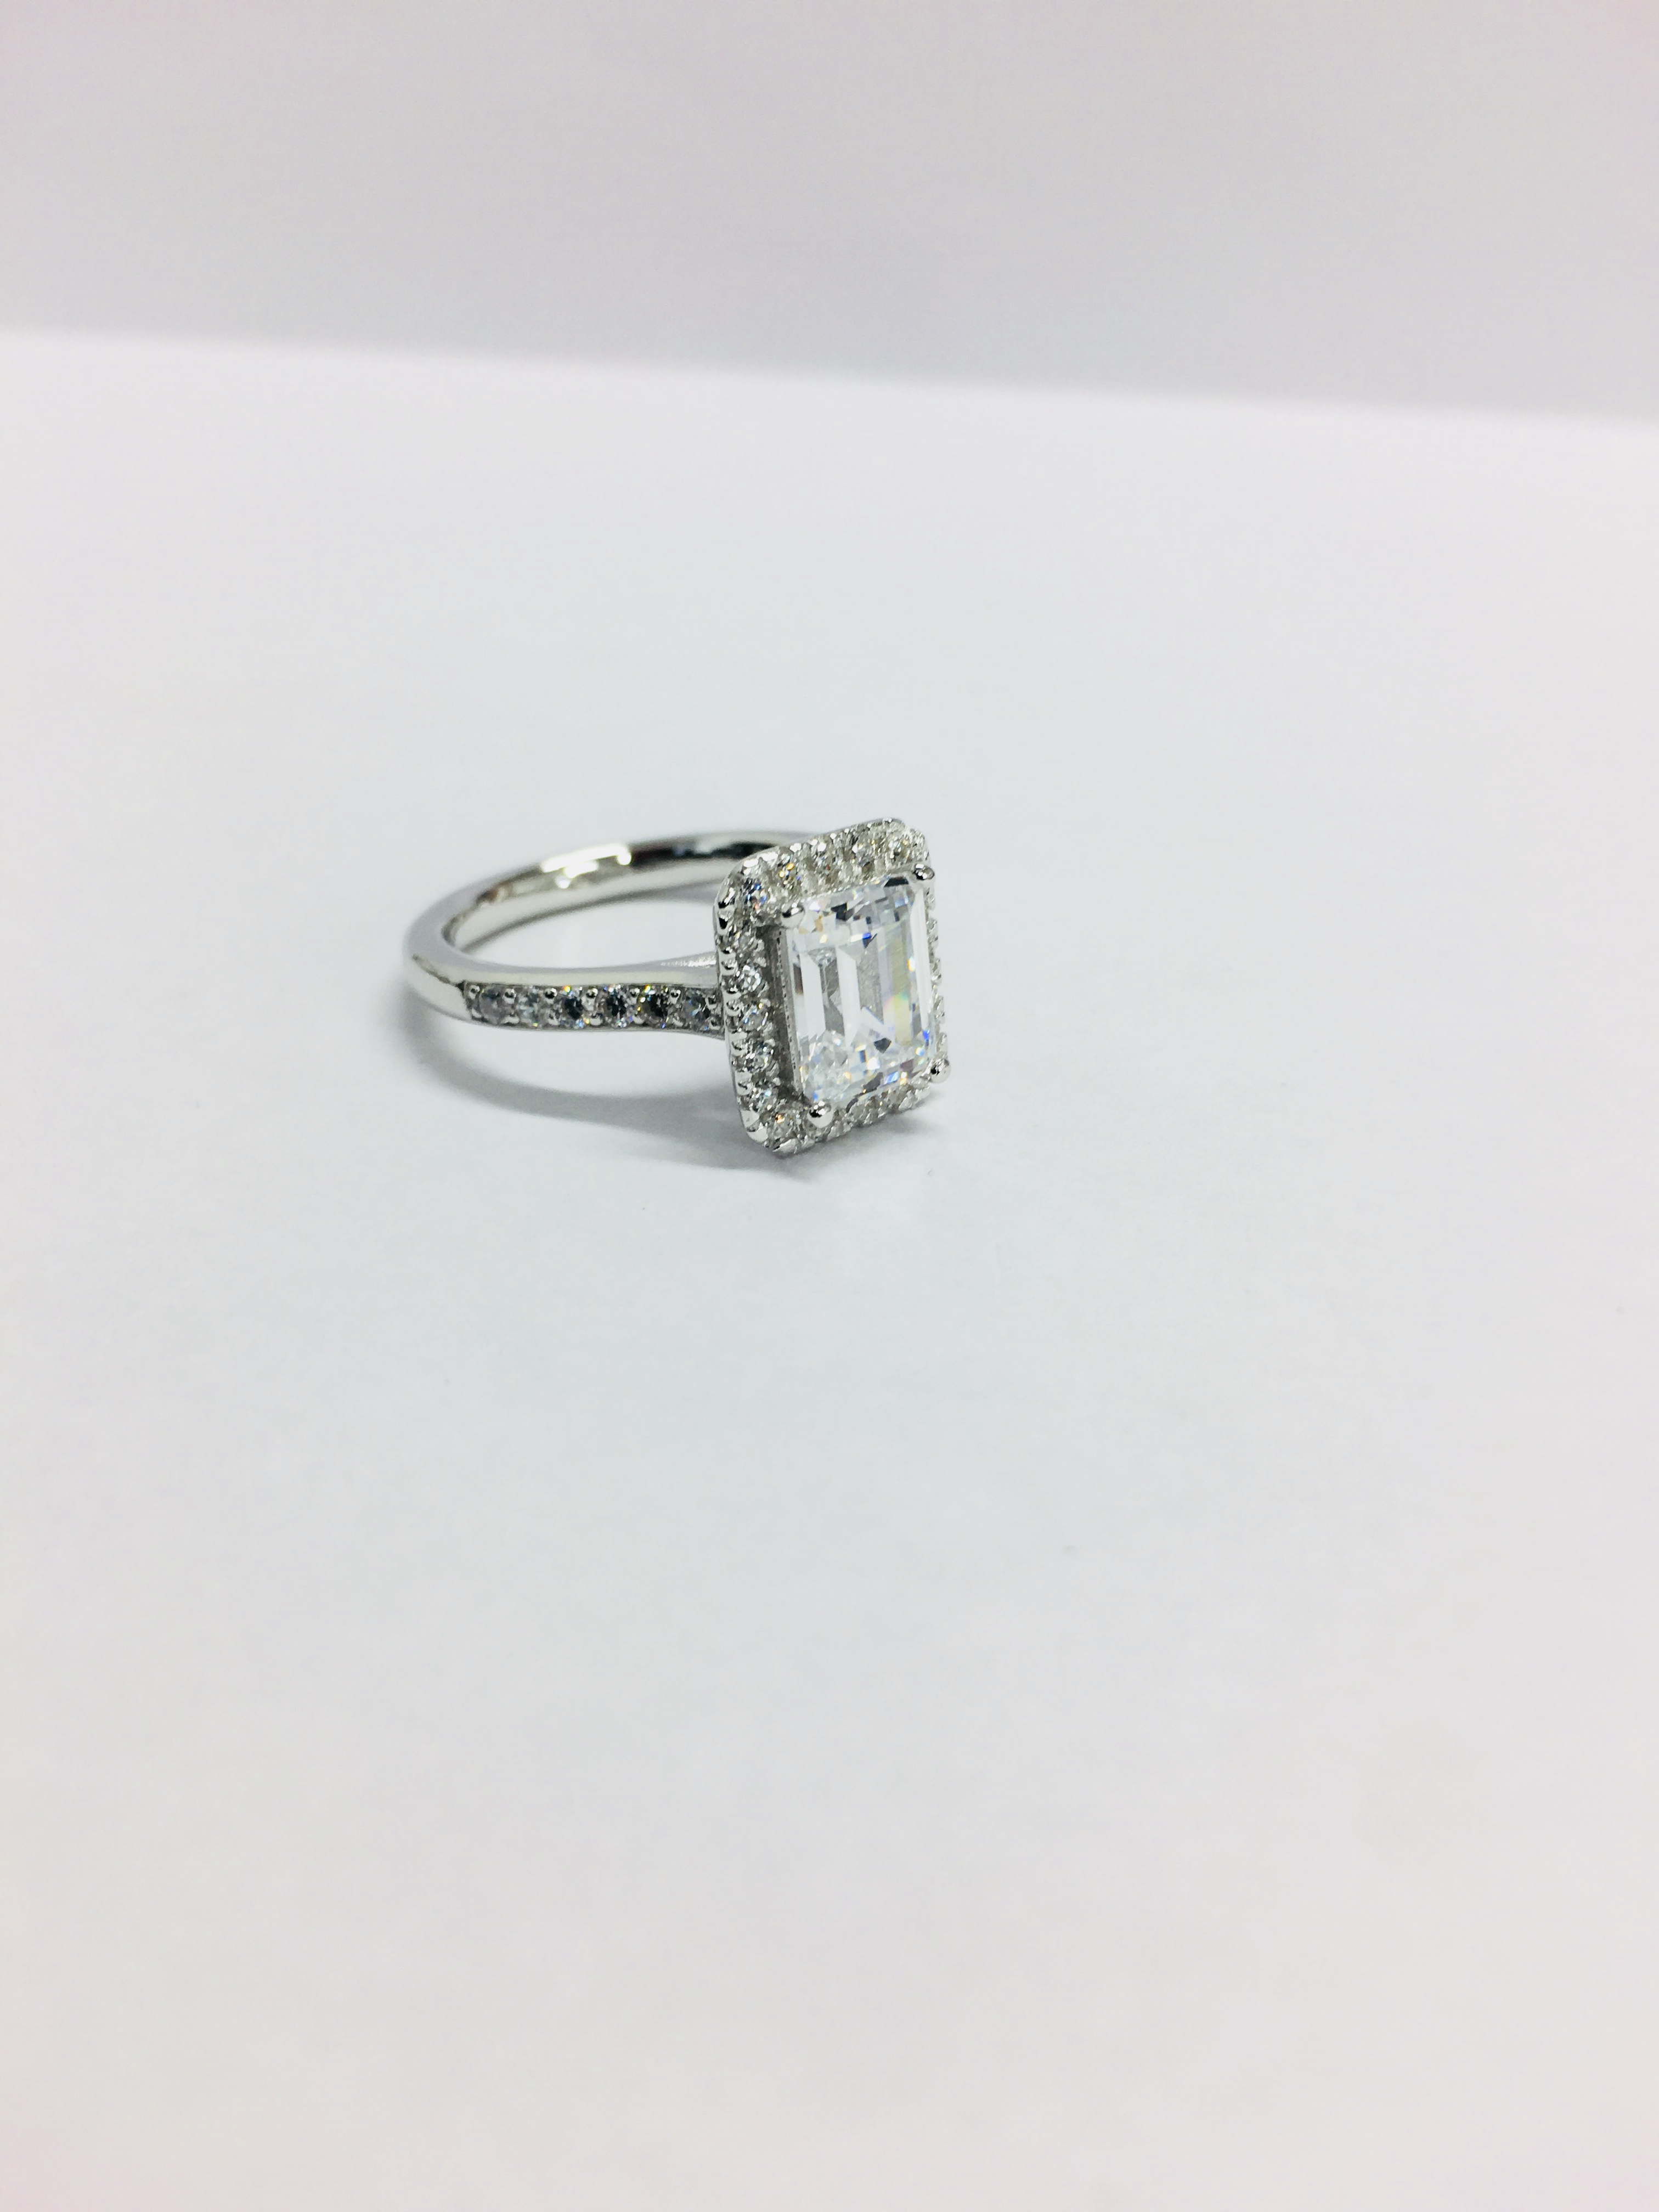 1.2ct diamond solitaire ring set with an emerald cut diamond - Image 7 of 8